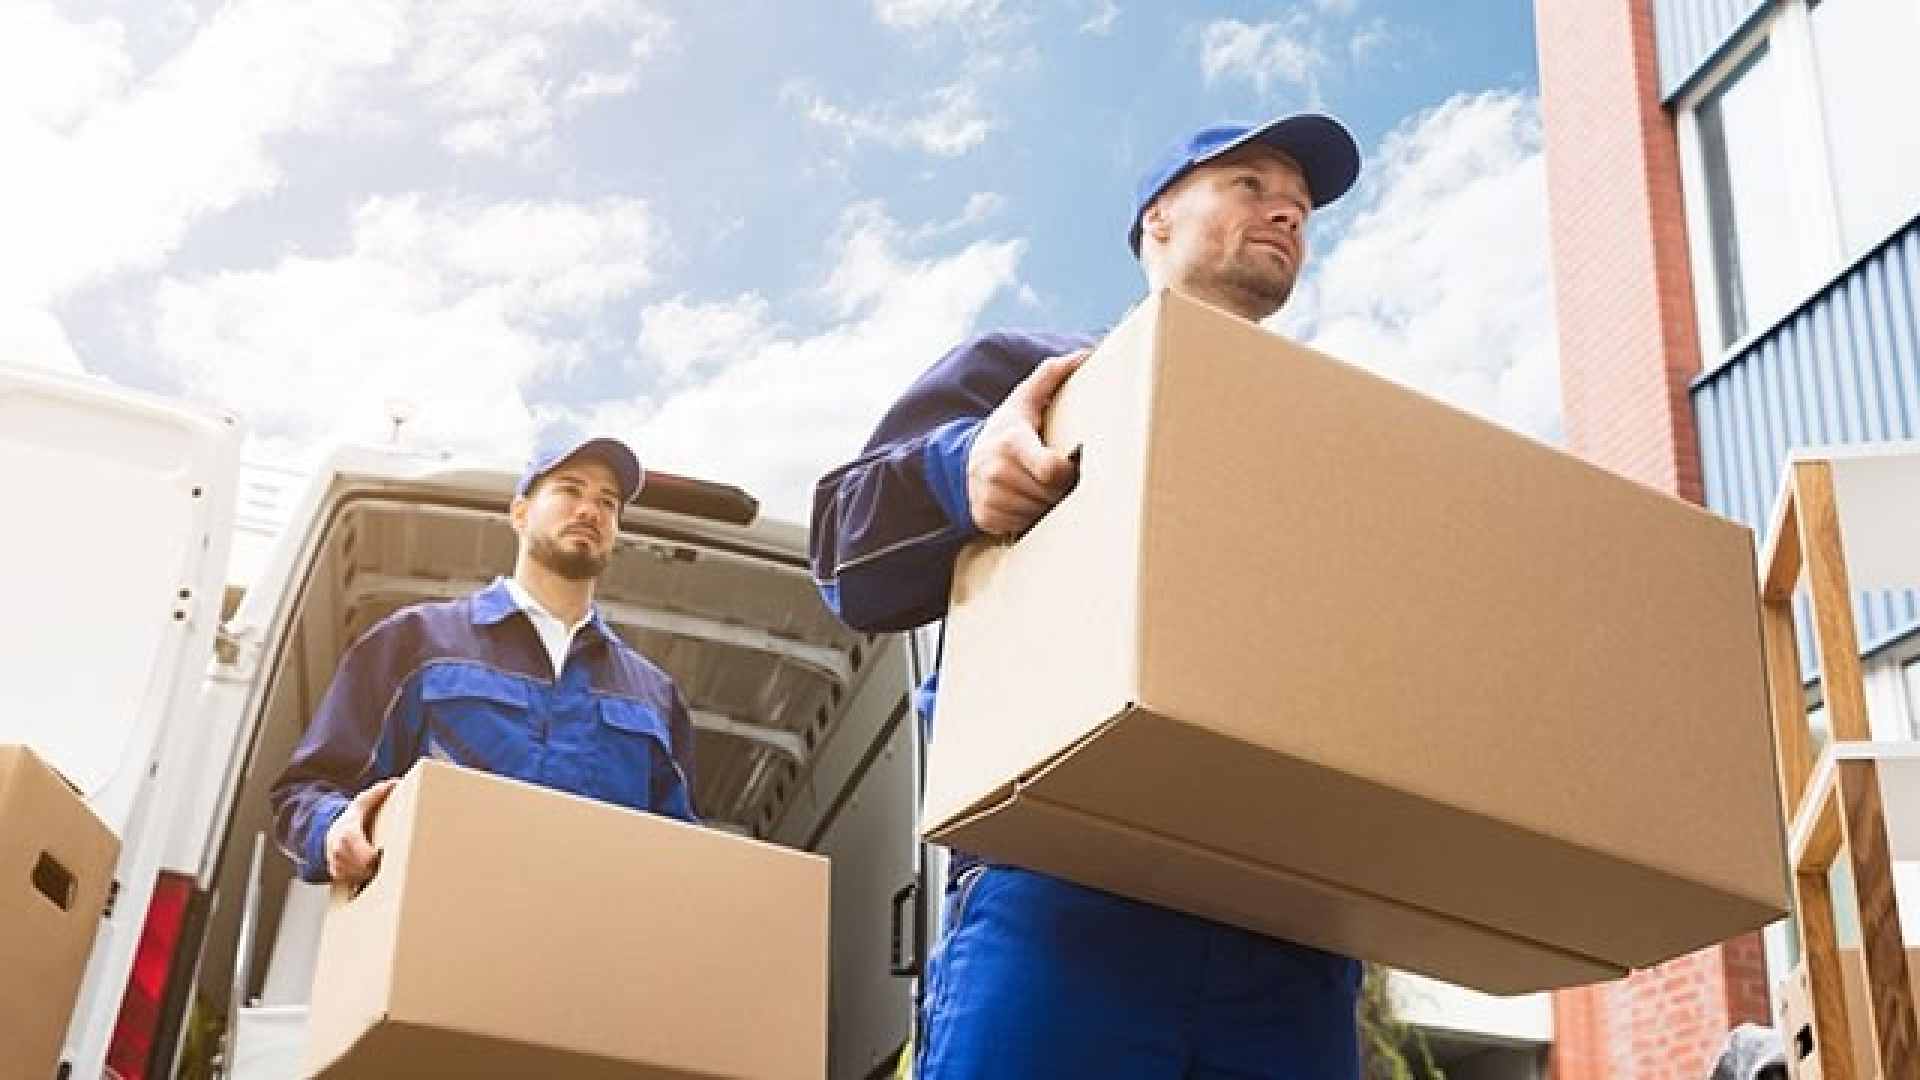 movers and packers in fujairah